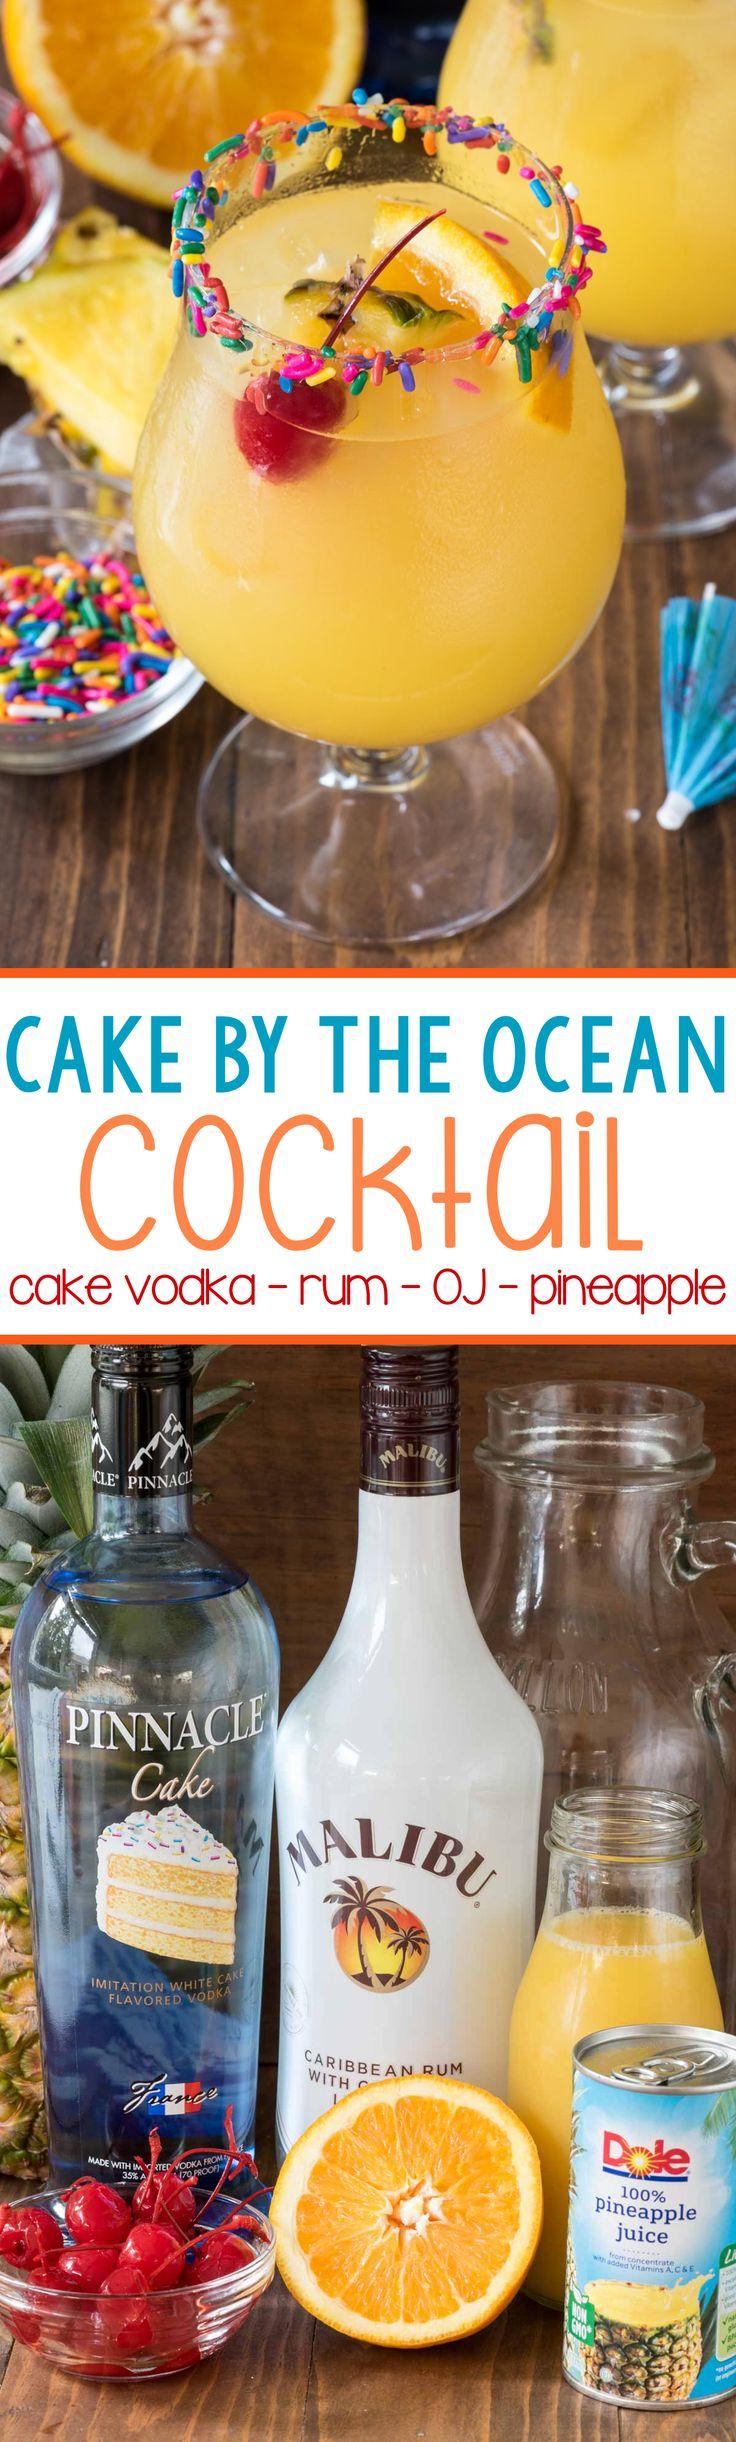 Wedding - Cake By The Ocean Cocktail